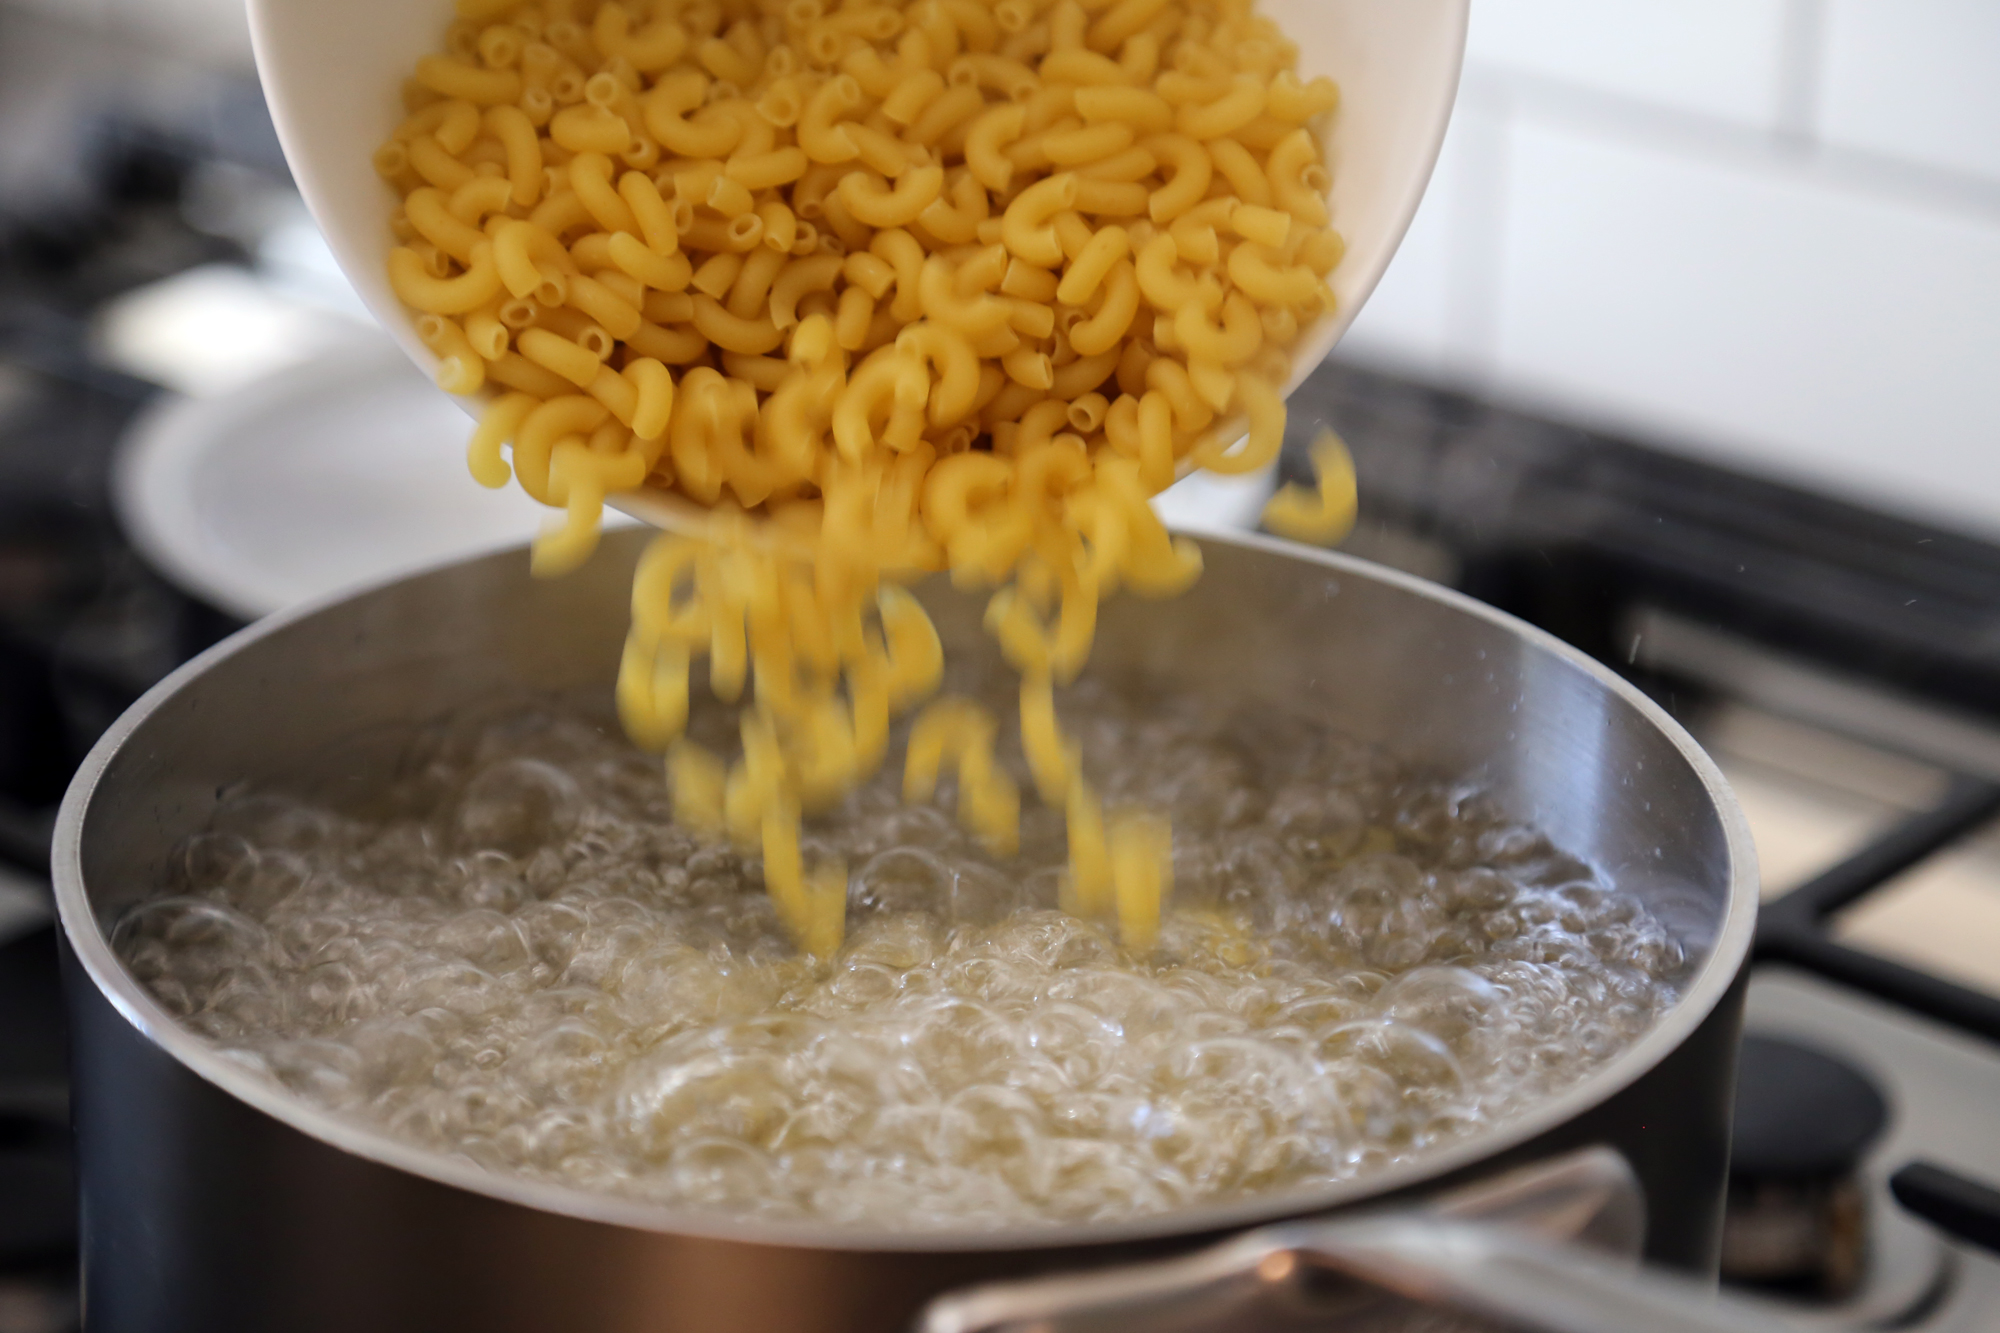 In a saucepan, bring plenty of salted water to a boil, add the macaroni, and cook until al dente.